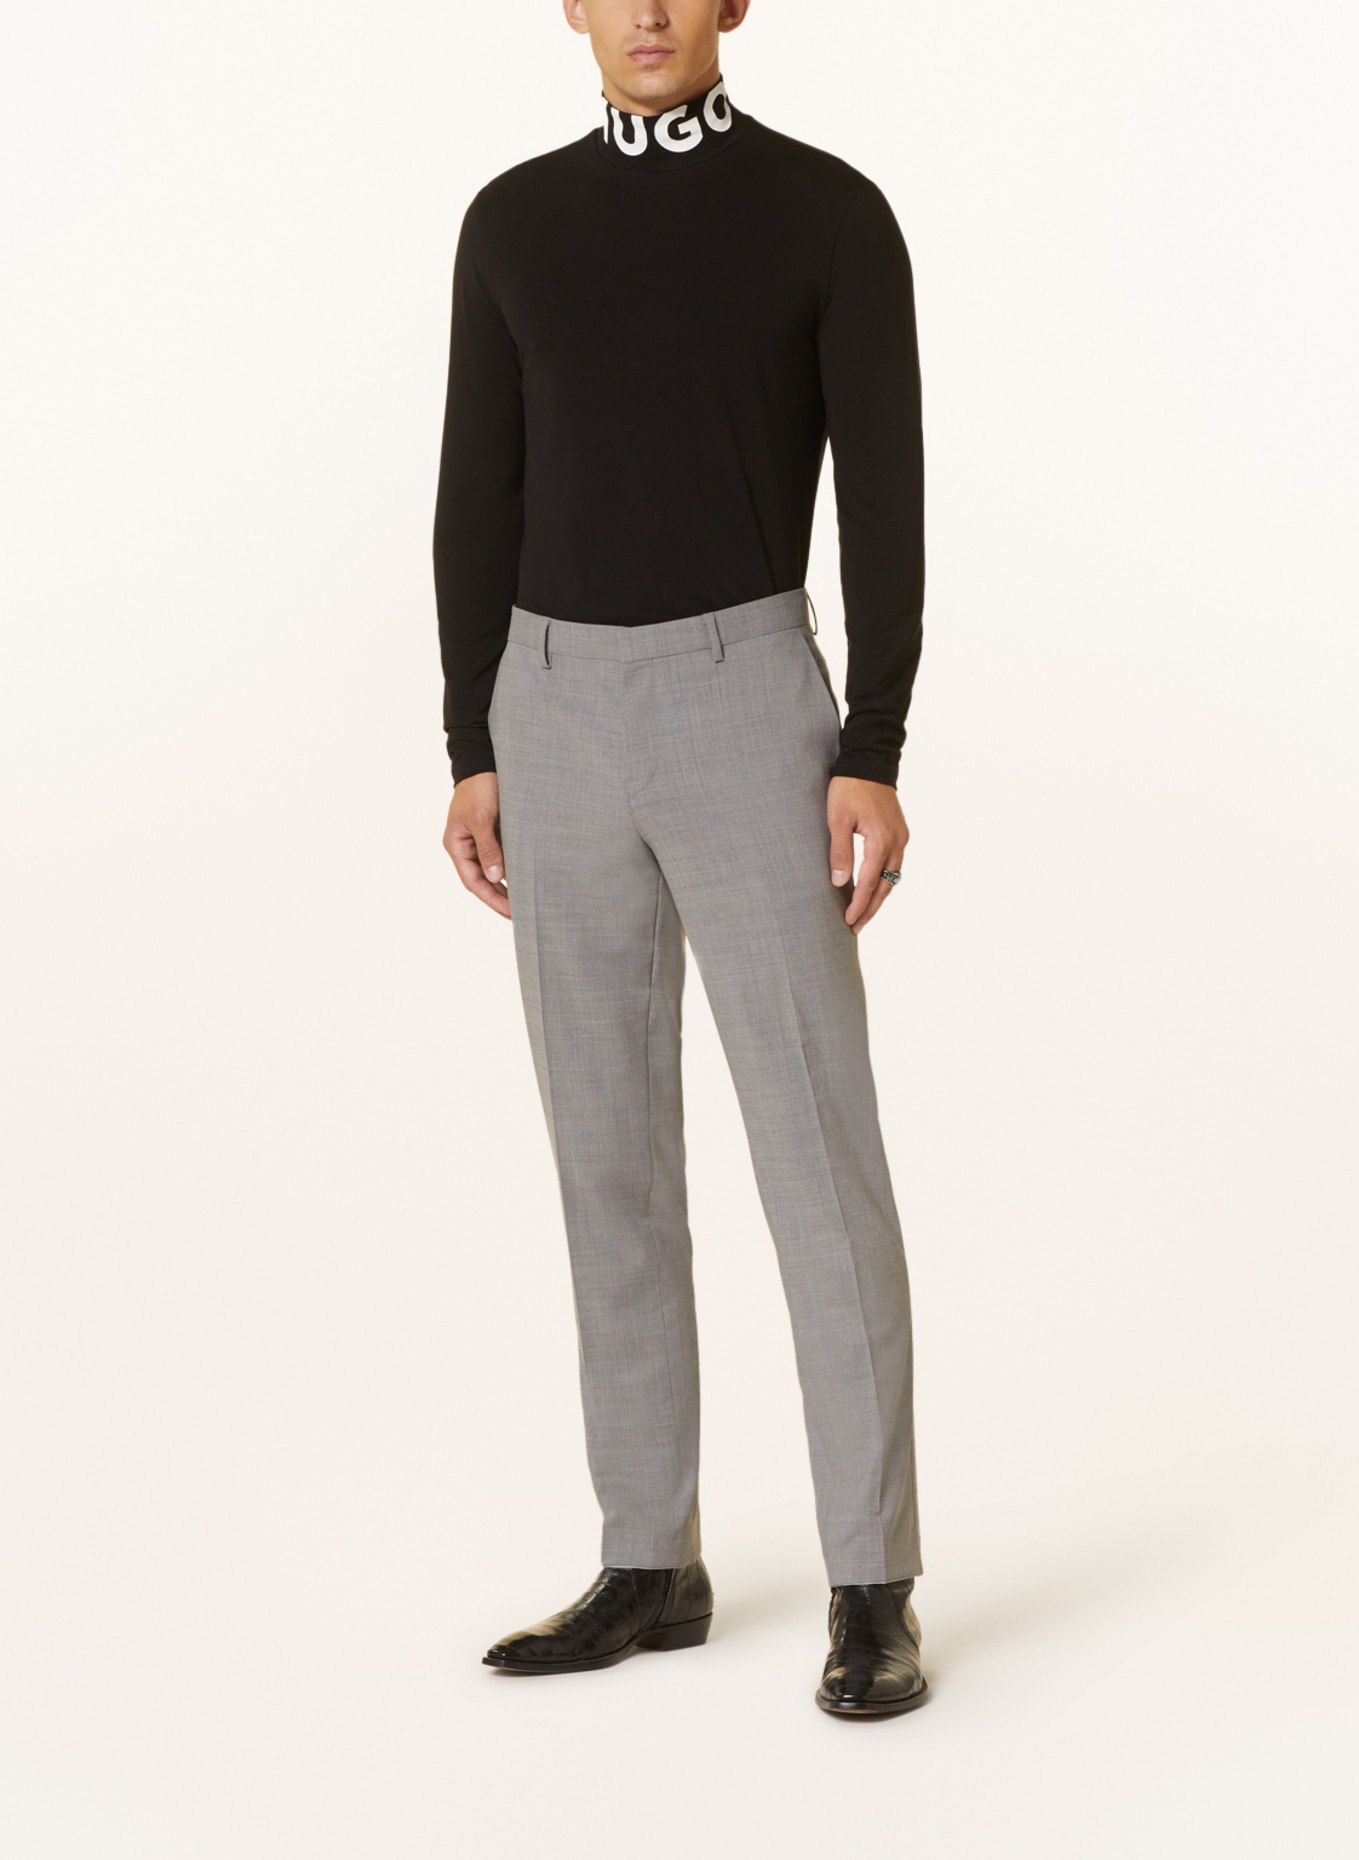 Buy Charcoal Grey Slim Signature Tollegno Wool Suit: Trousers from Next USA